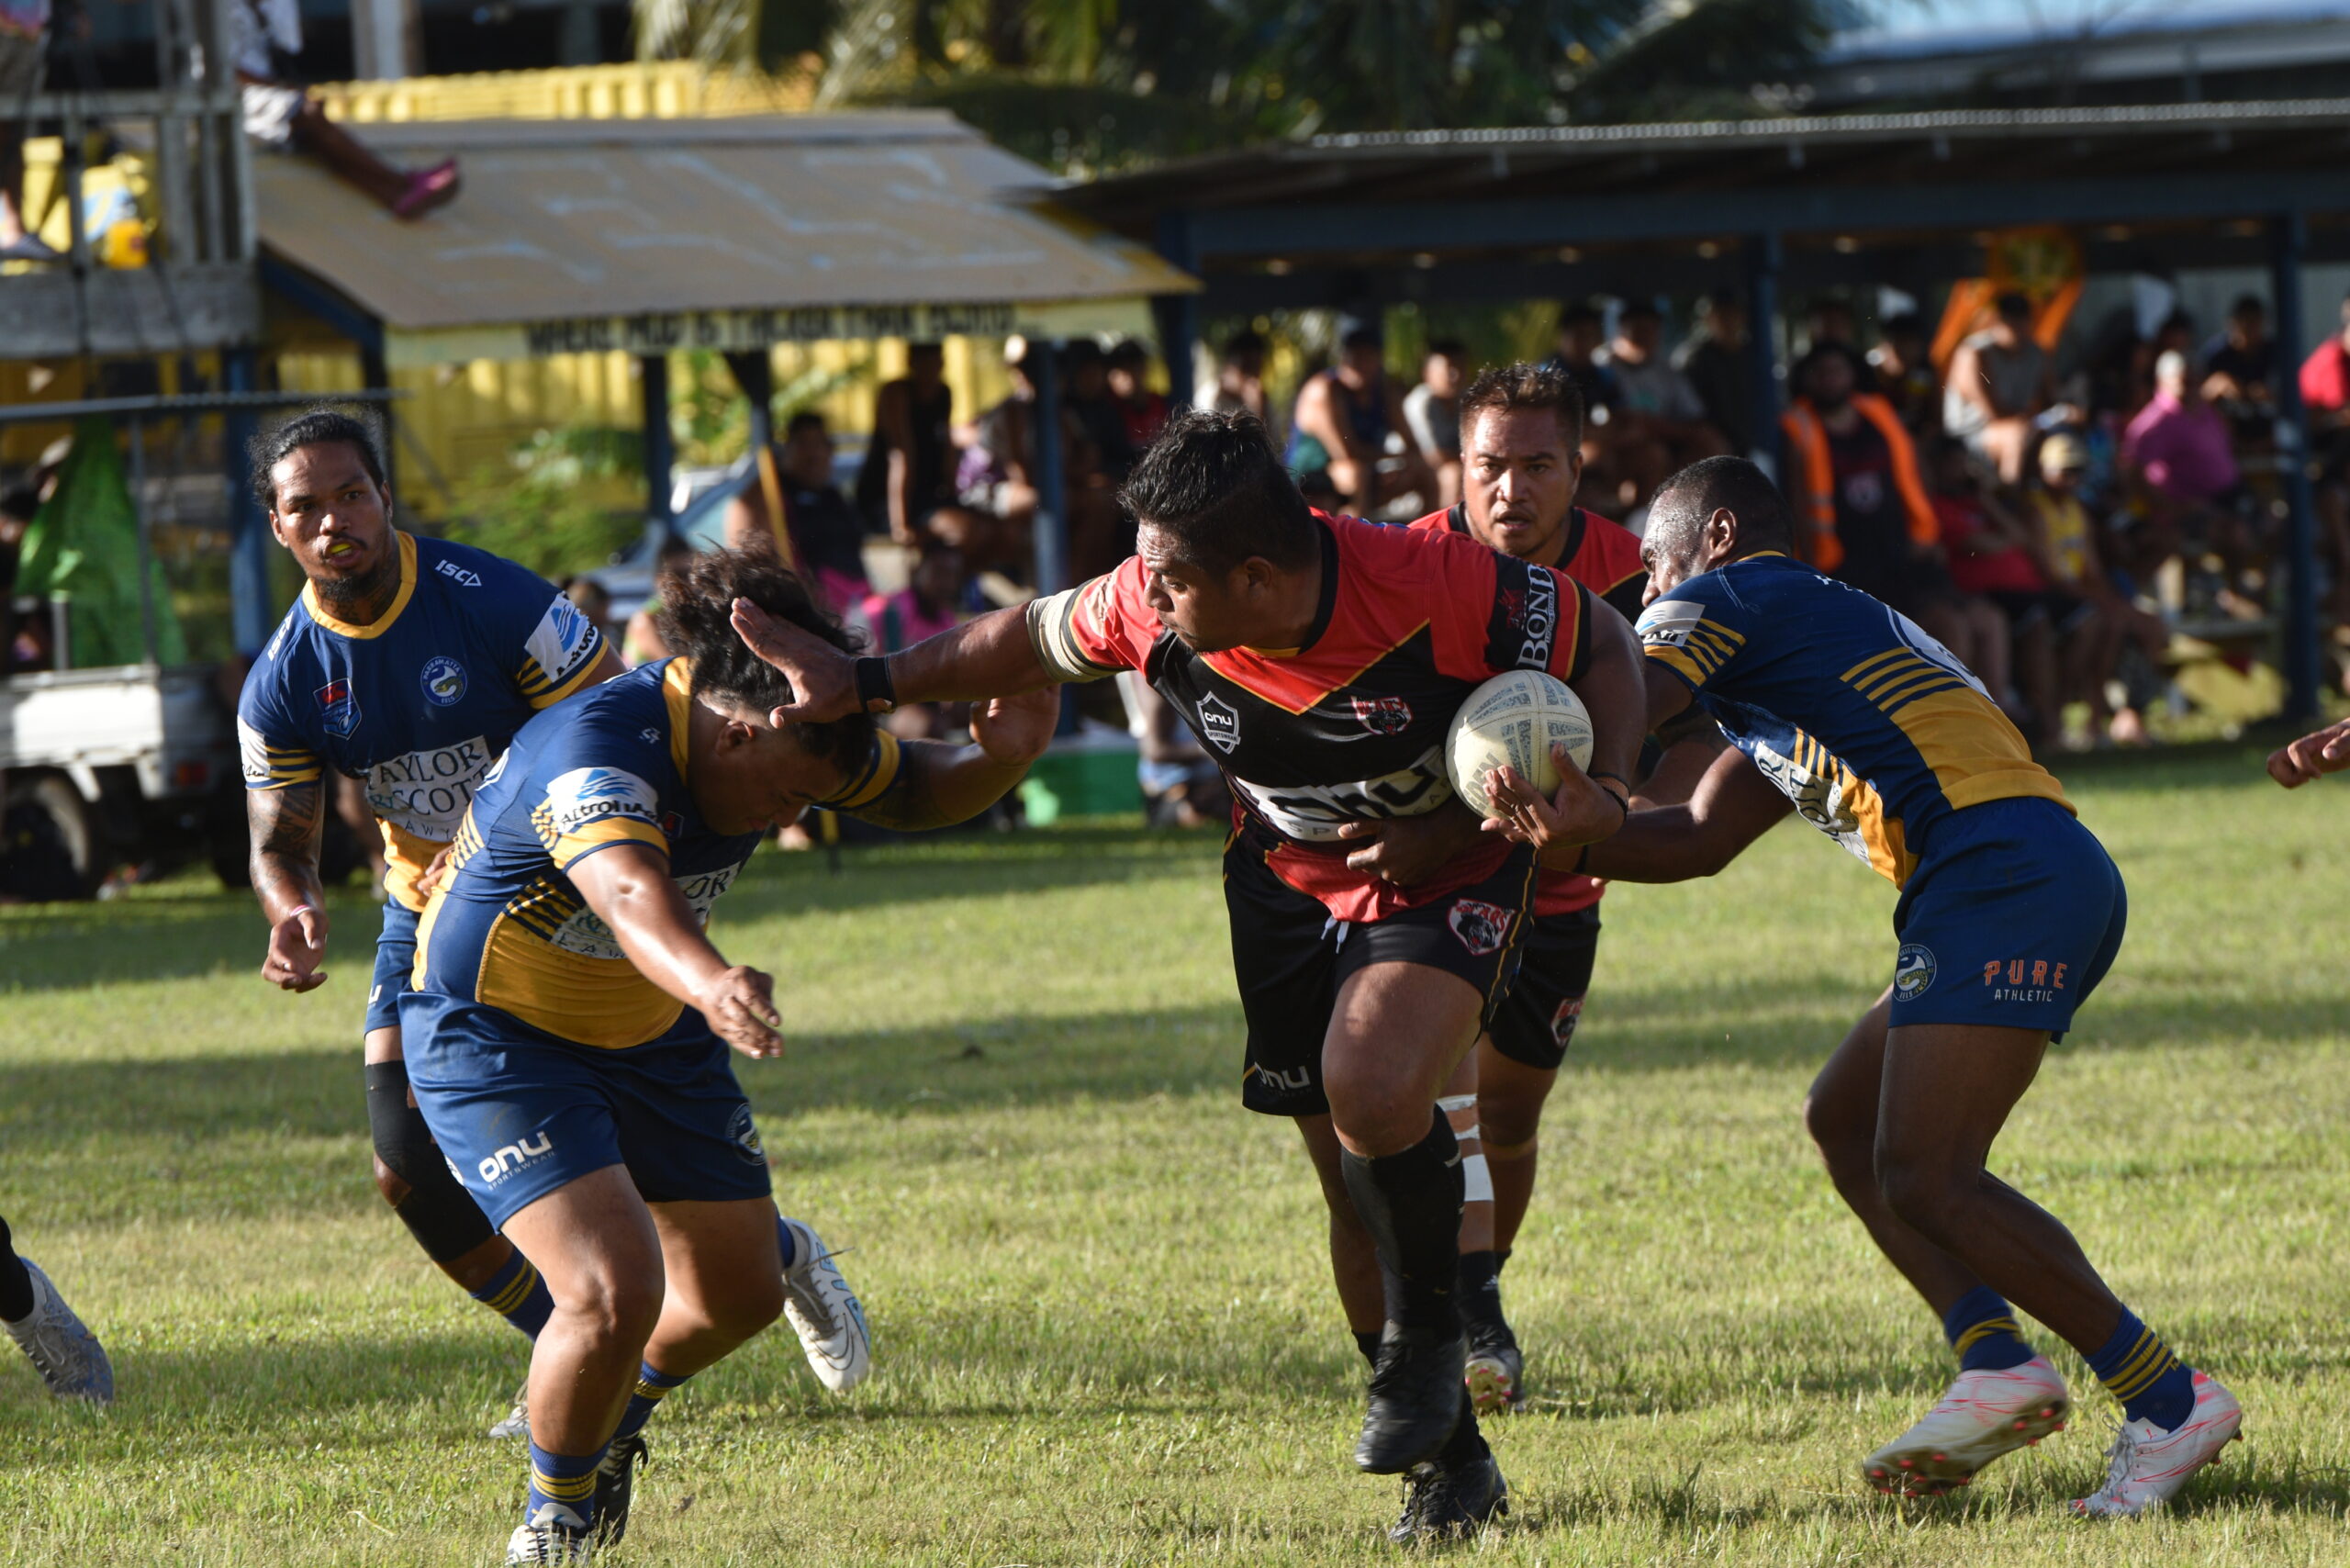 Contenders clash for title